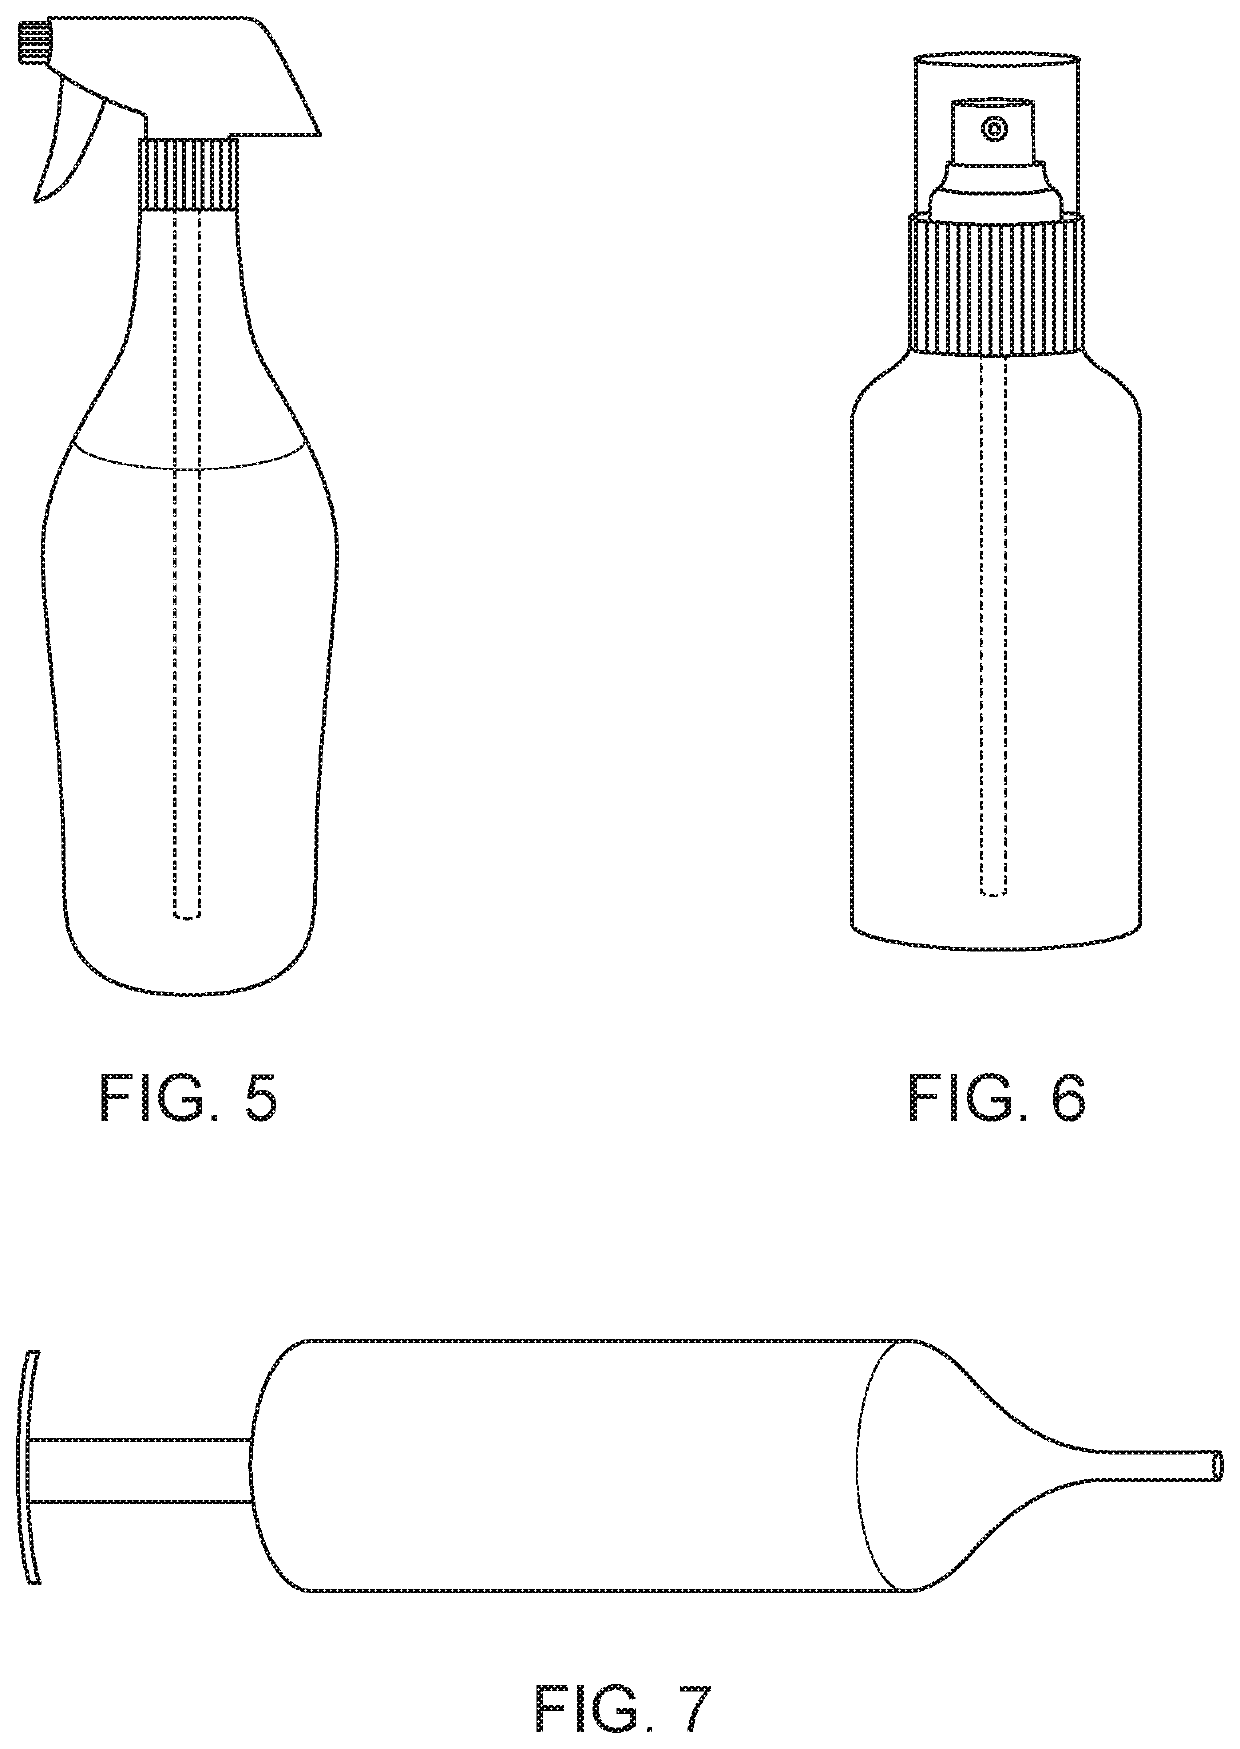 Compositions and methods of treatment with amniotic fluid